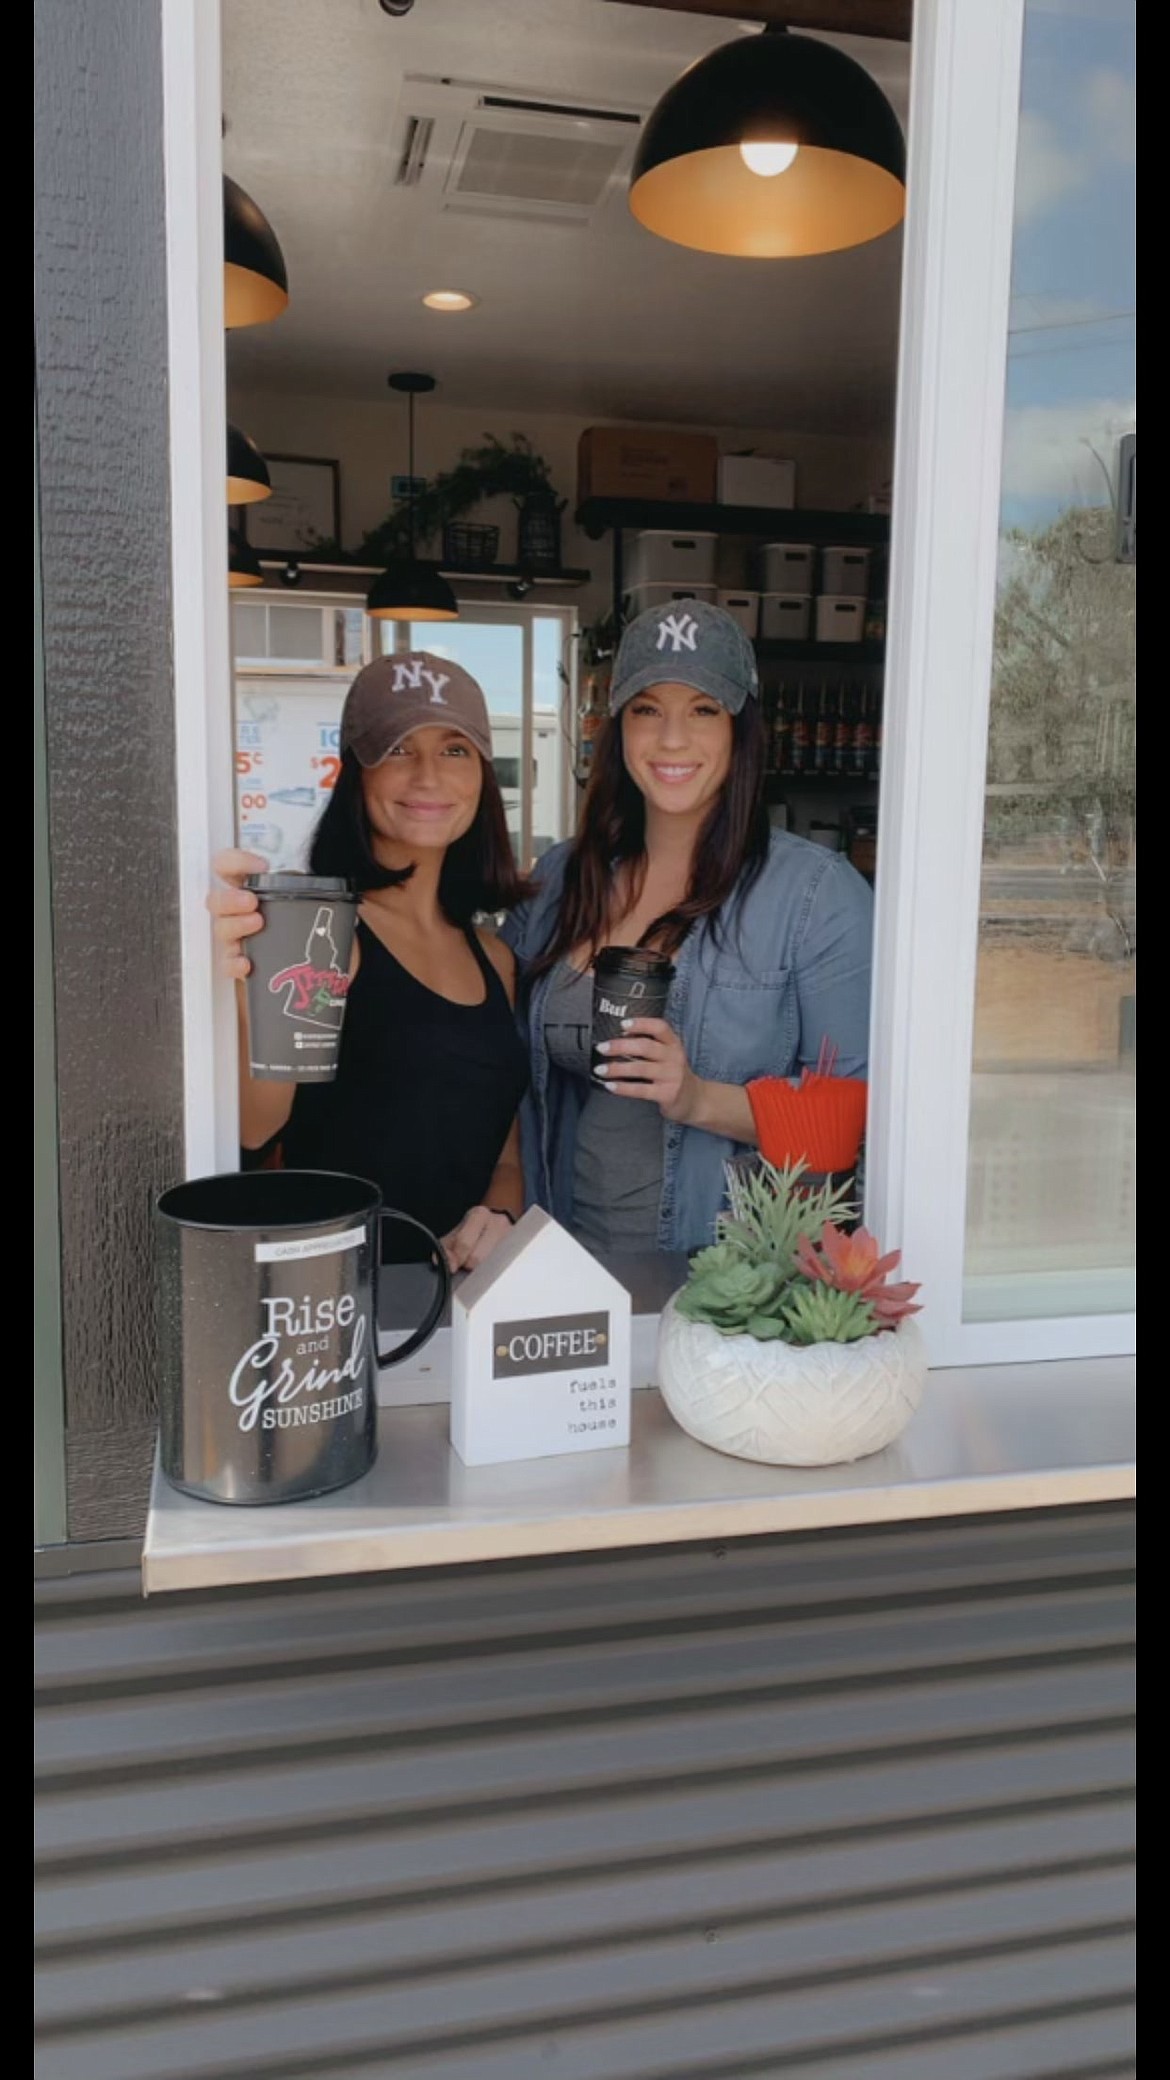 Courtesy photo
Manager Amber Bariel, left, and assistant manager Nikkie Johnson are ready to serve customers at the Jitterz Espresso stand at the southwest corner of Ramsey Road and Prairie Avenue.